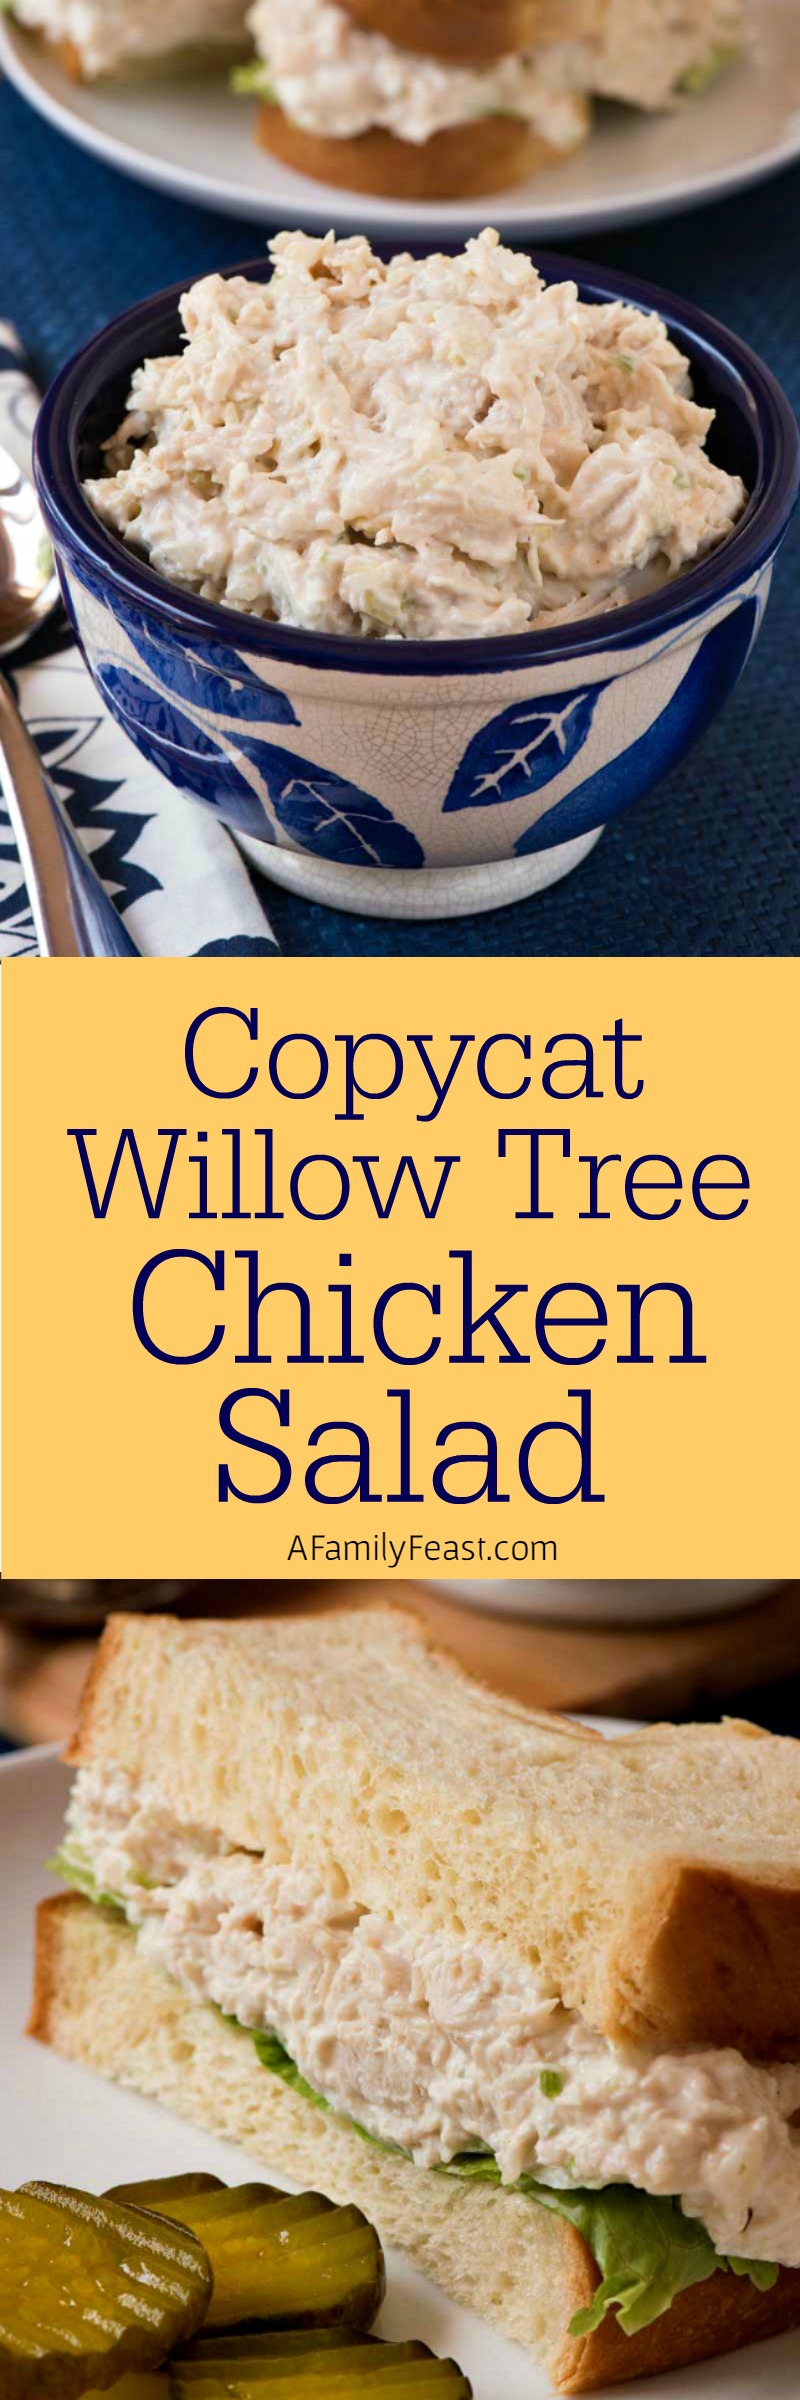 Imitate the Willow Chicken Salad - Our attempt at recreating the famous Willow Chicken Salad - and I think we